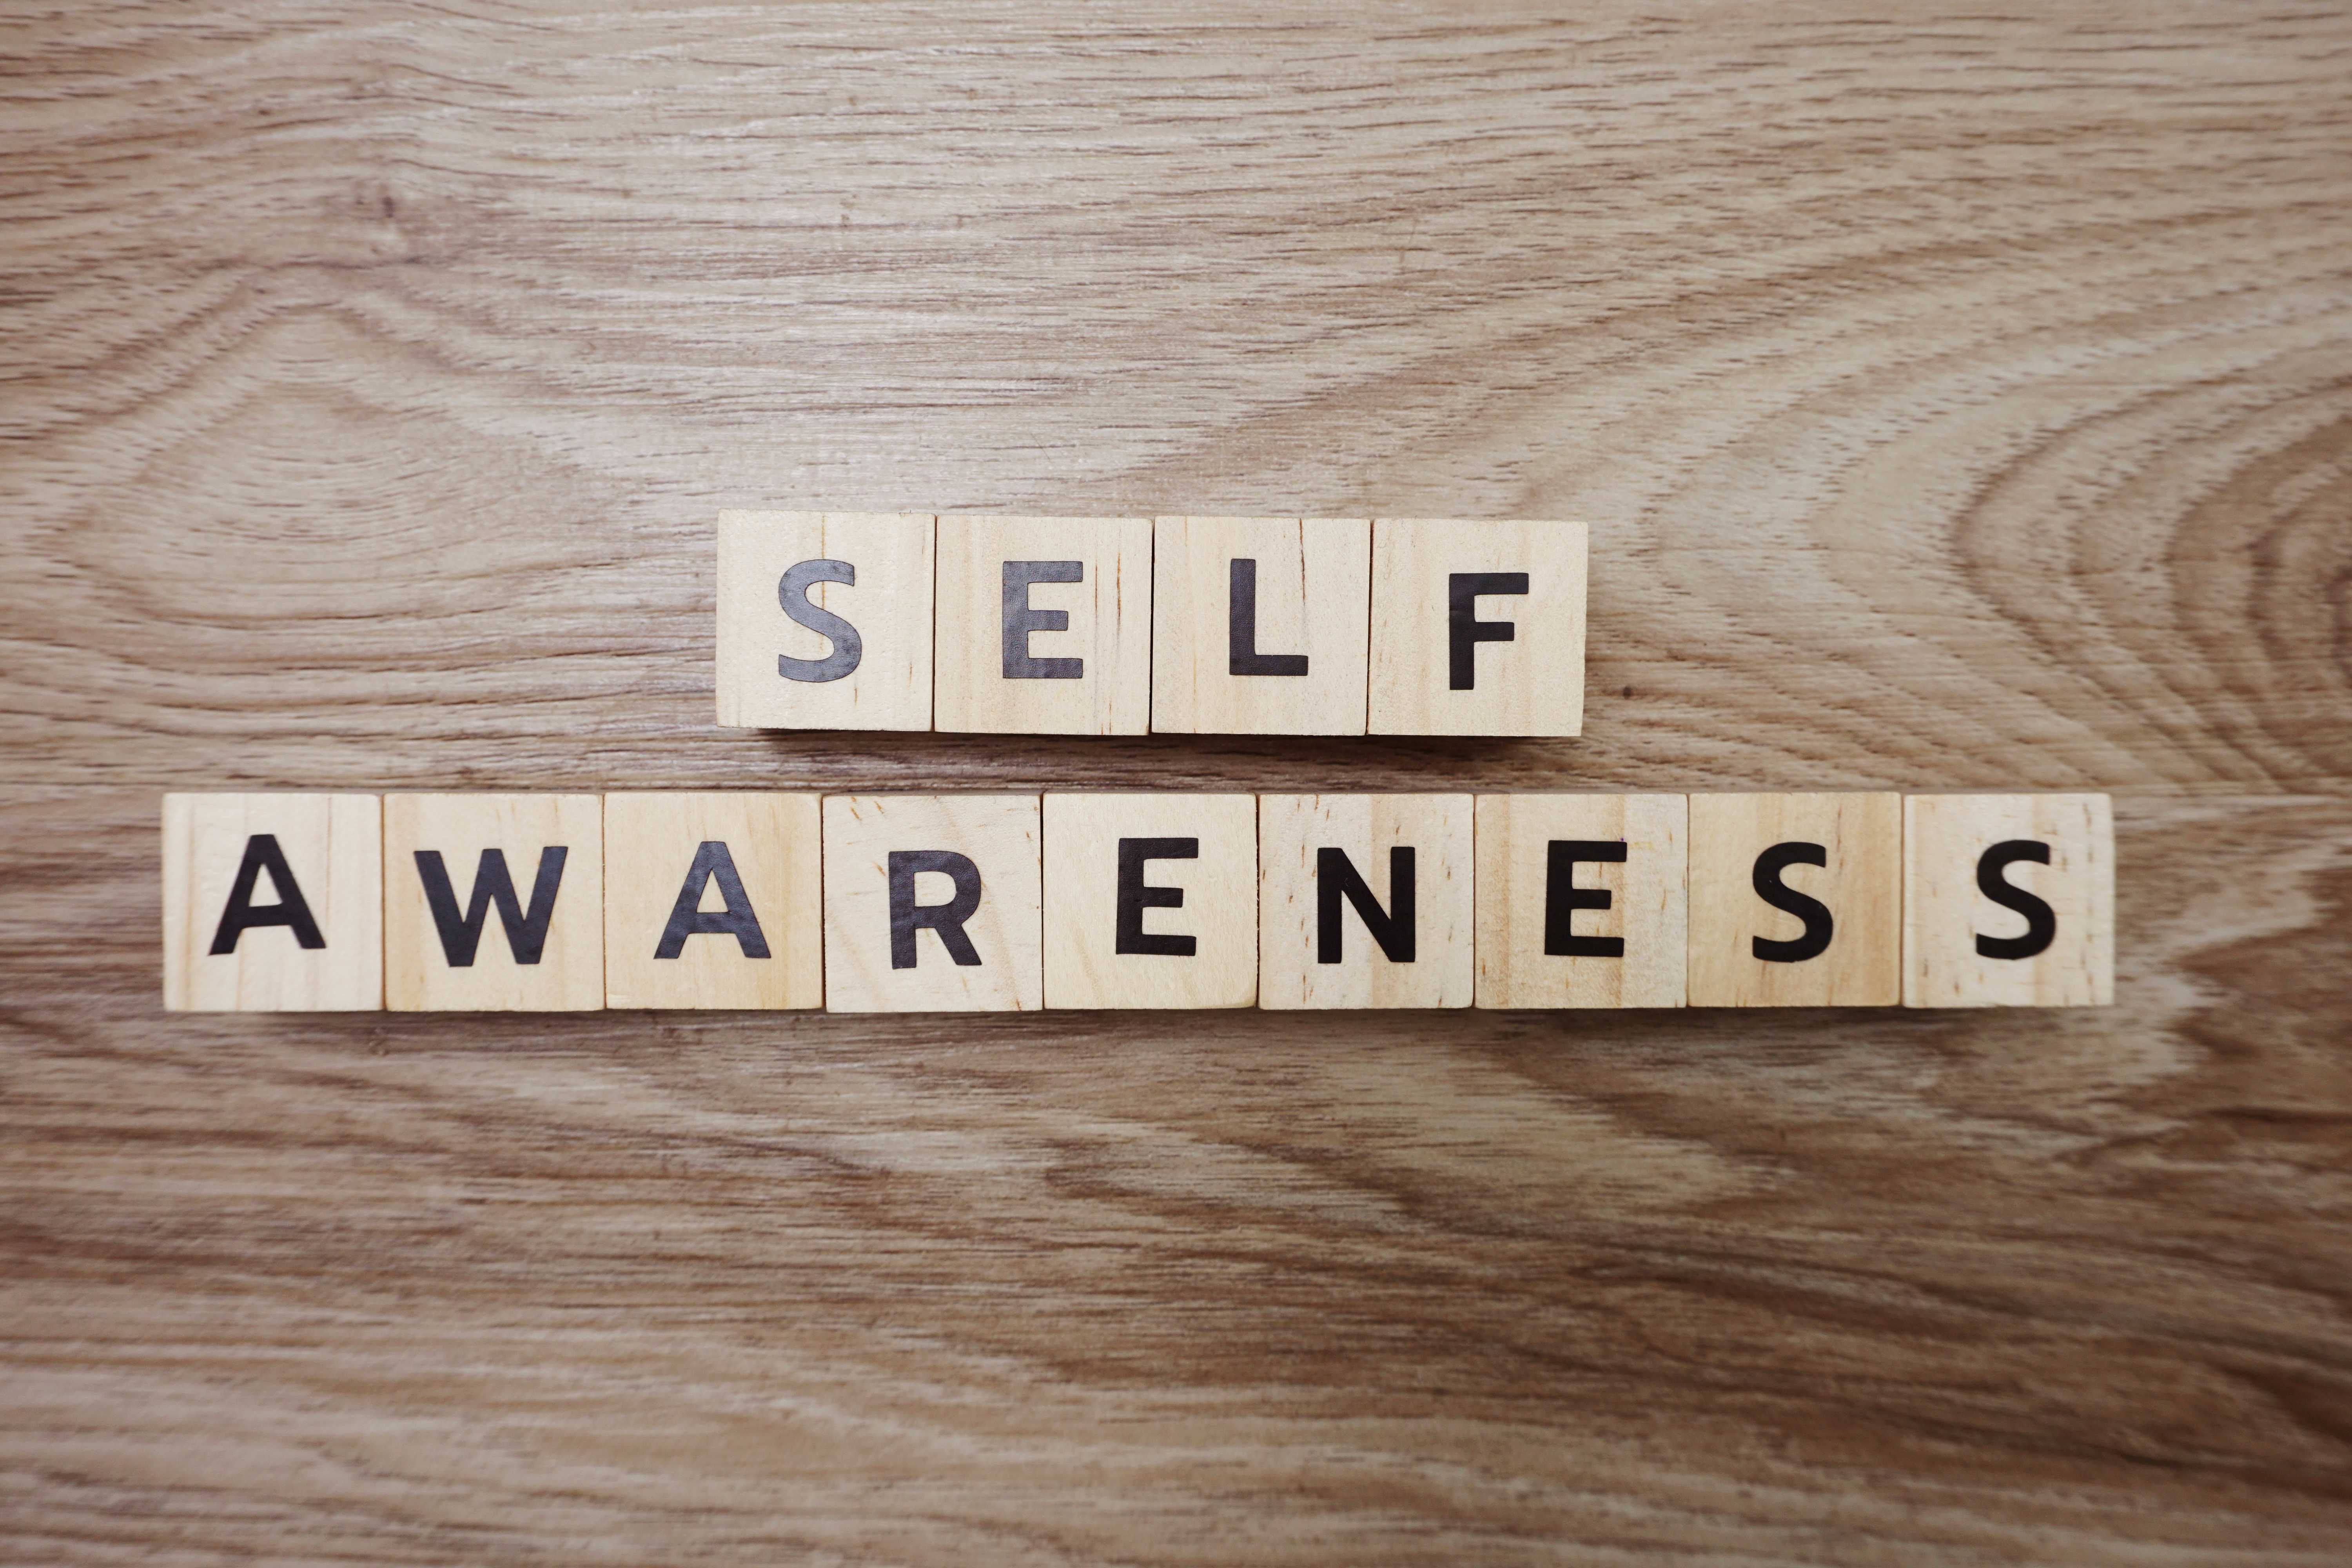 What is Self awareness?